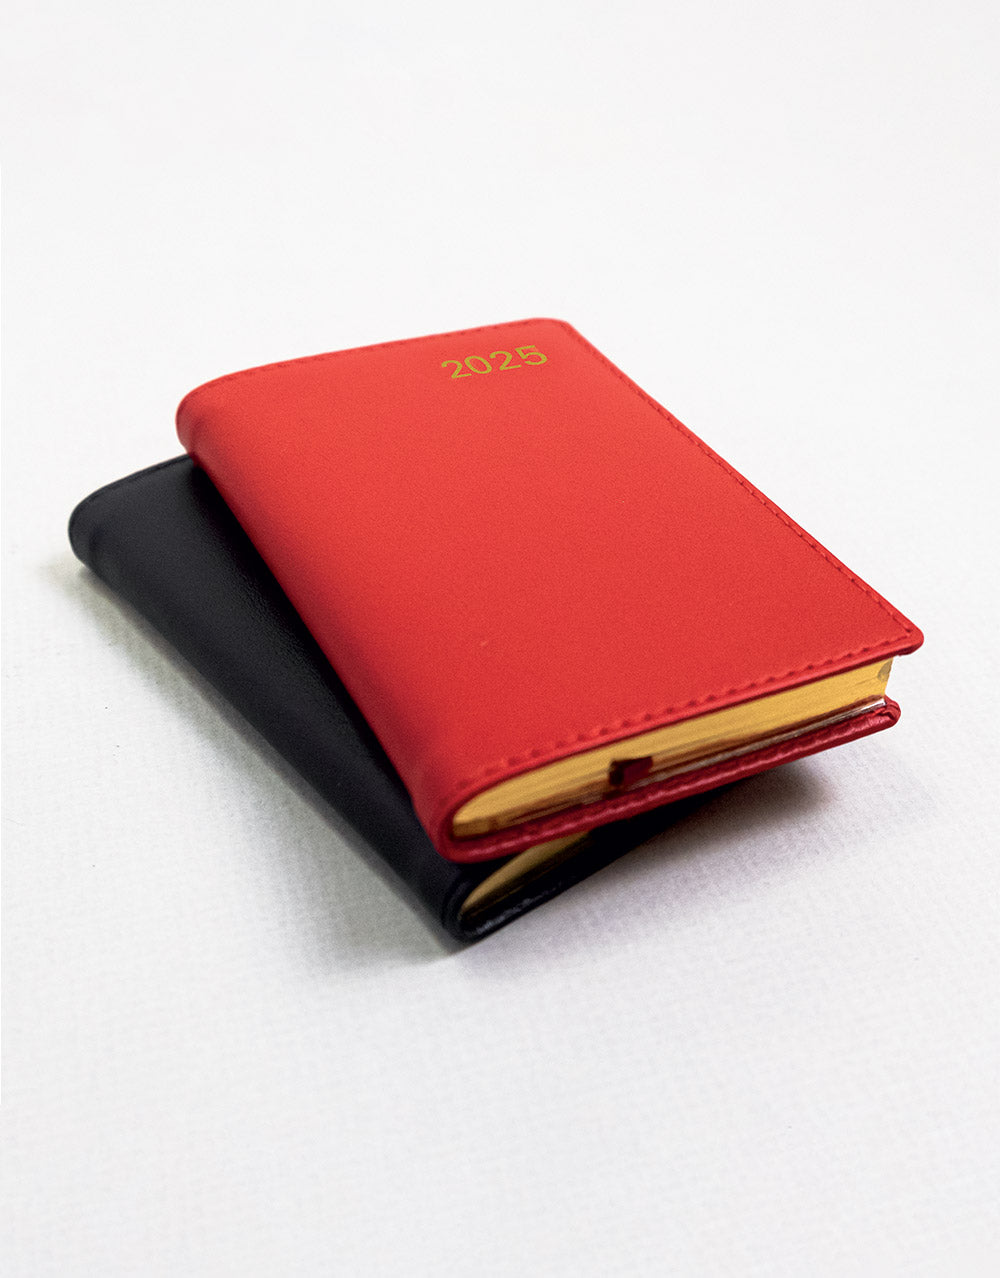 Belgravia Mini Pocket Week to View Leather Diary with Planners 2025 - English 25-C33EBK#color_black